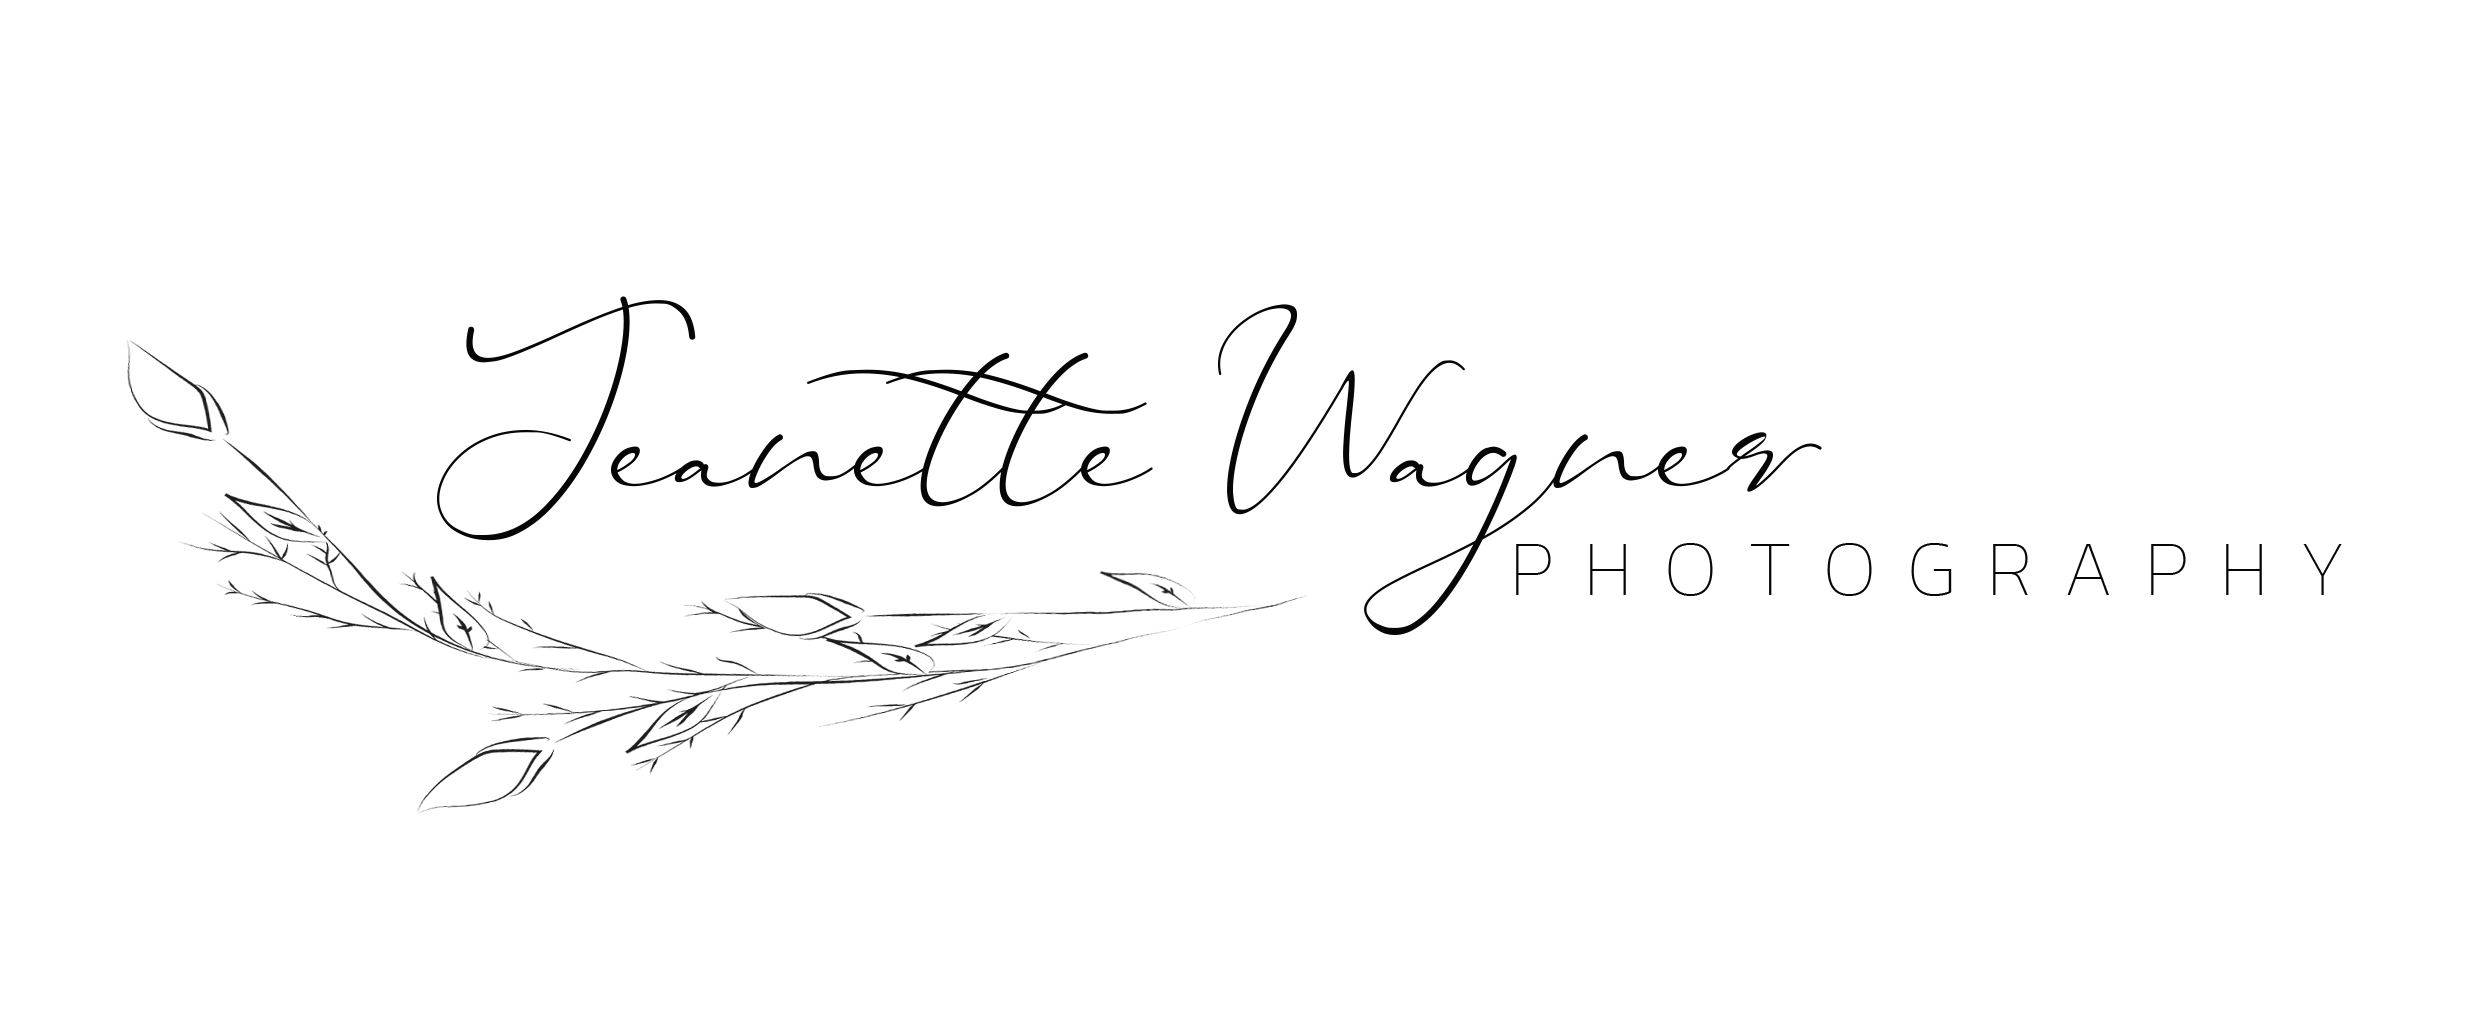 Jeanette Wagner Photography